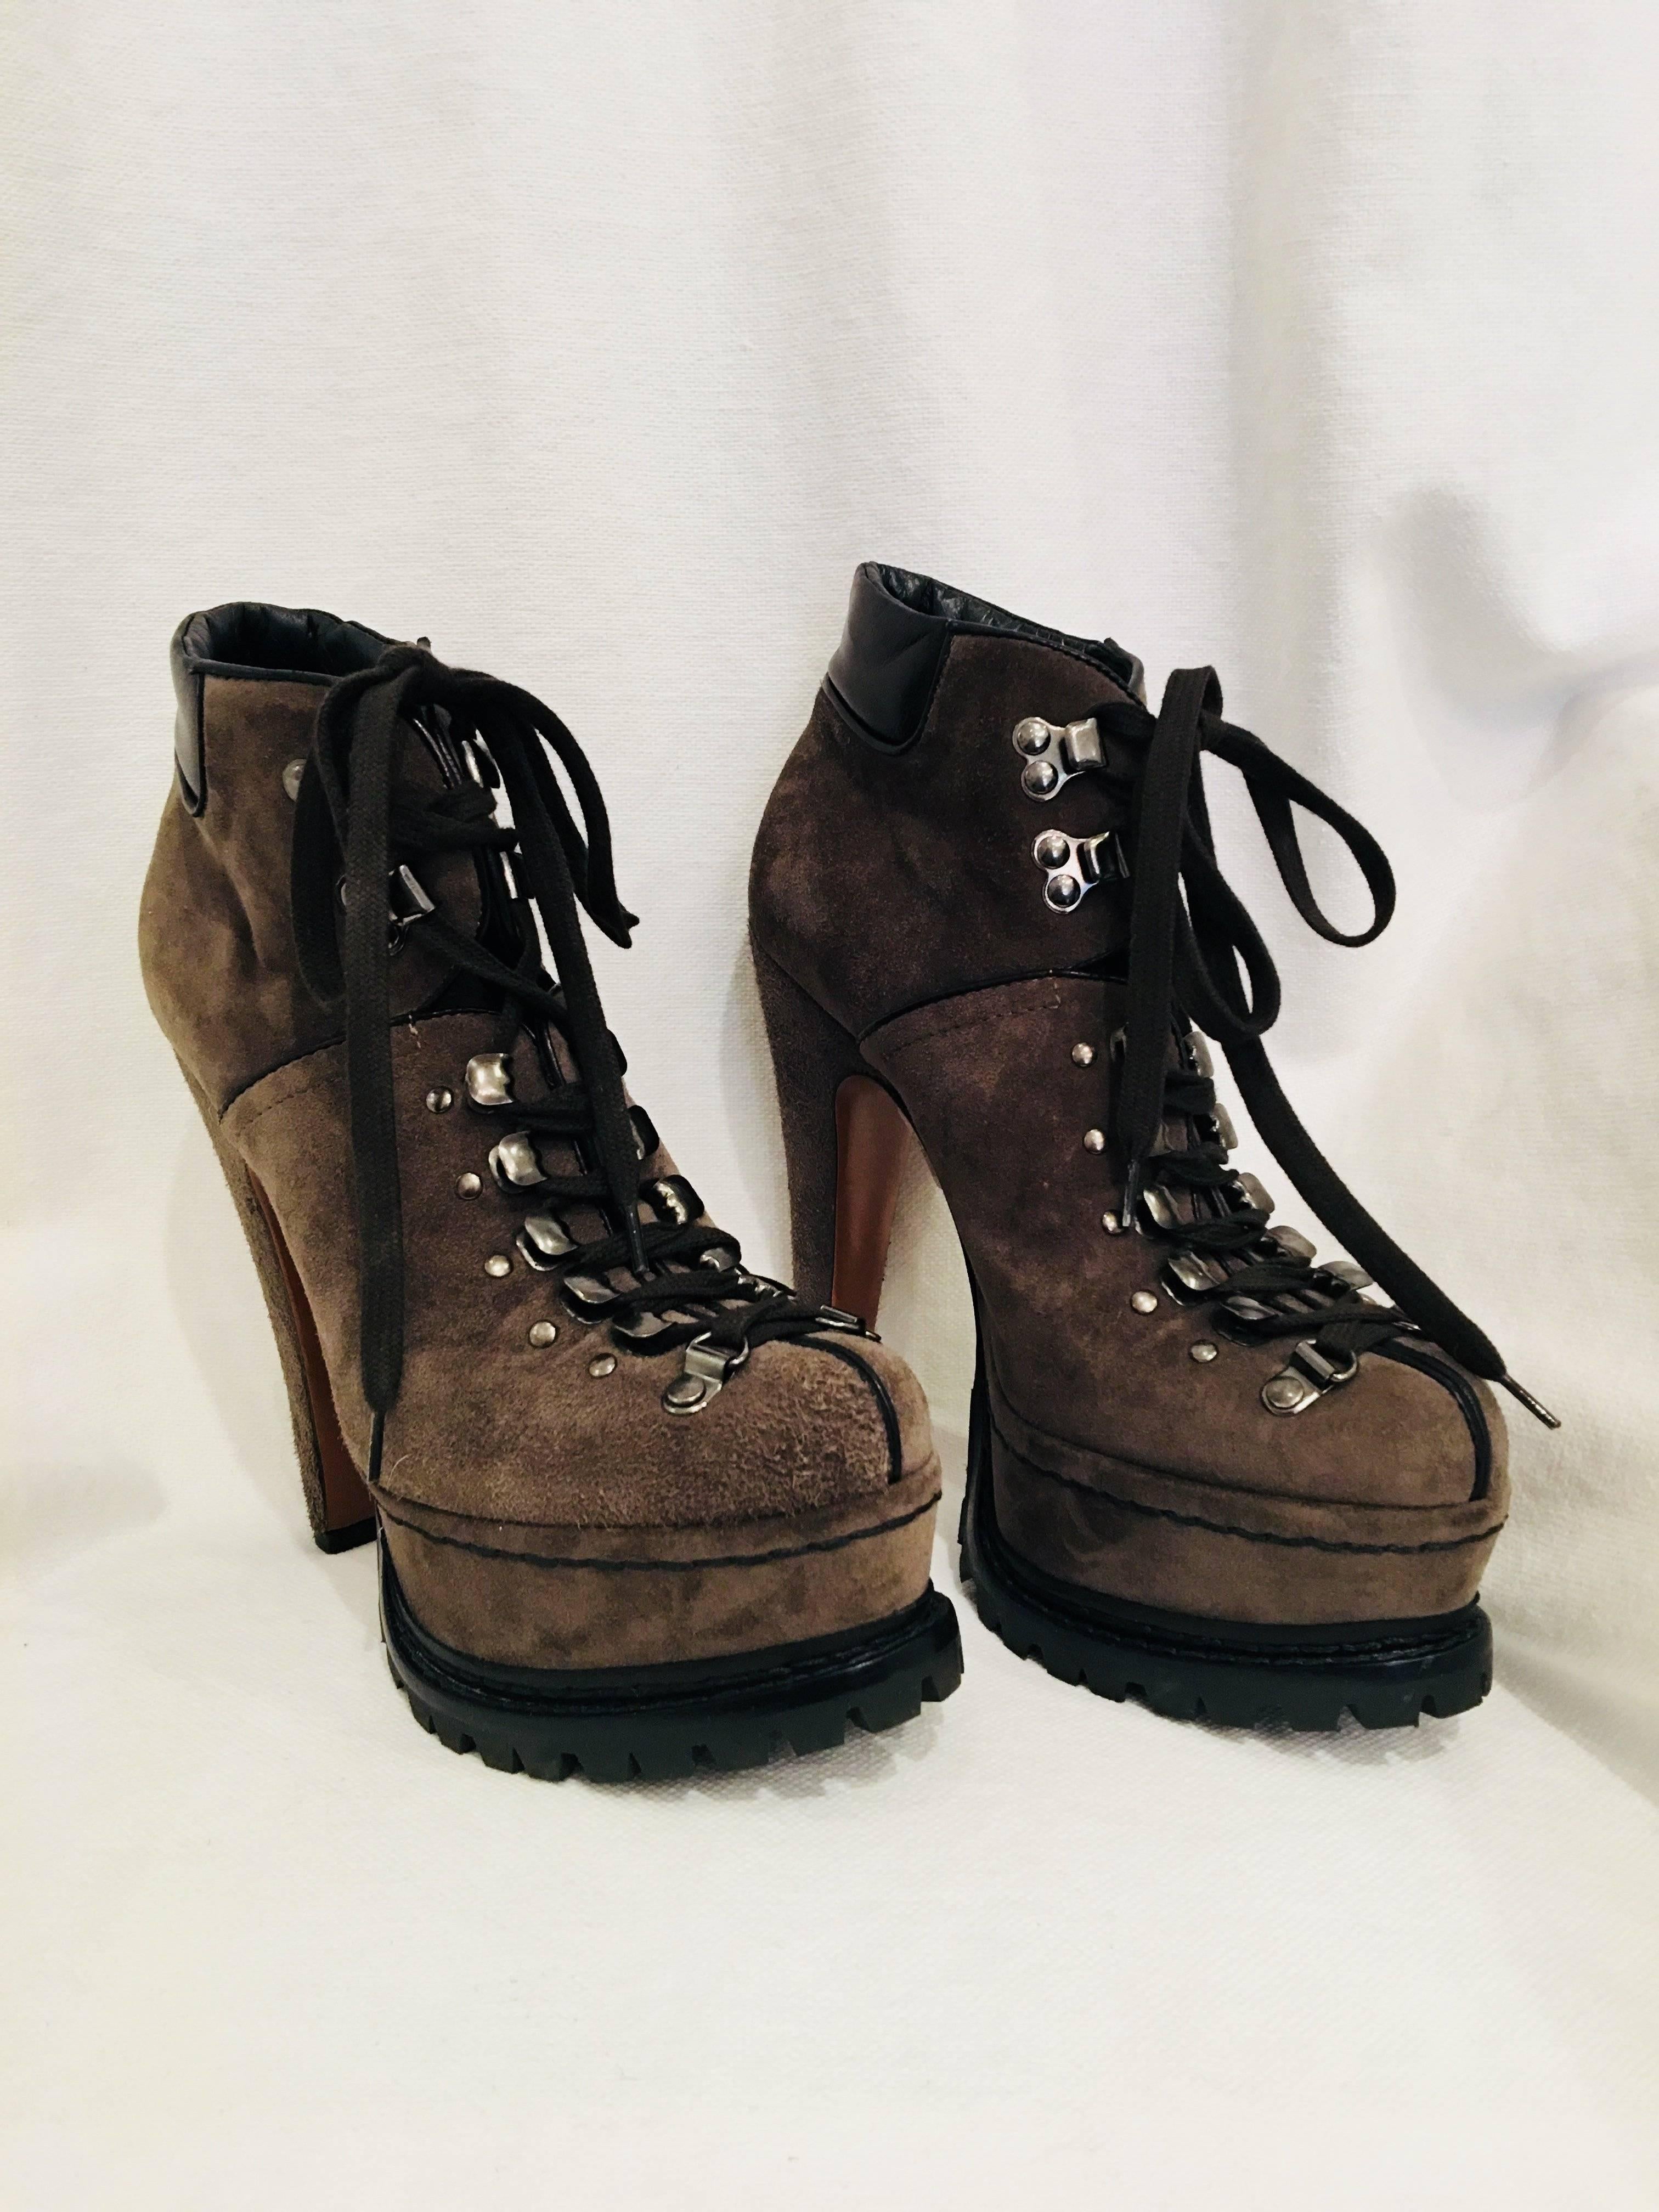 Alaia Lace Up Platform Ankle Boot with Thick Rubber Soles and High Heel.